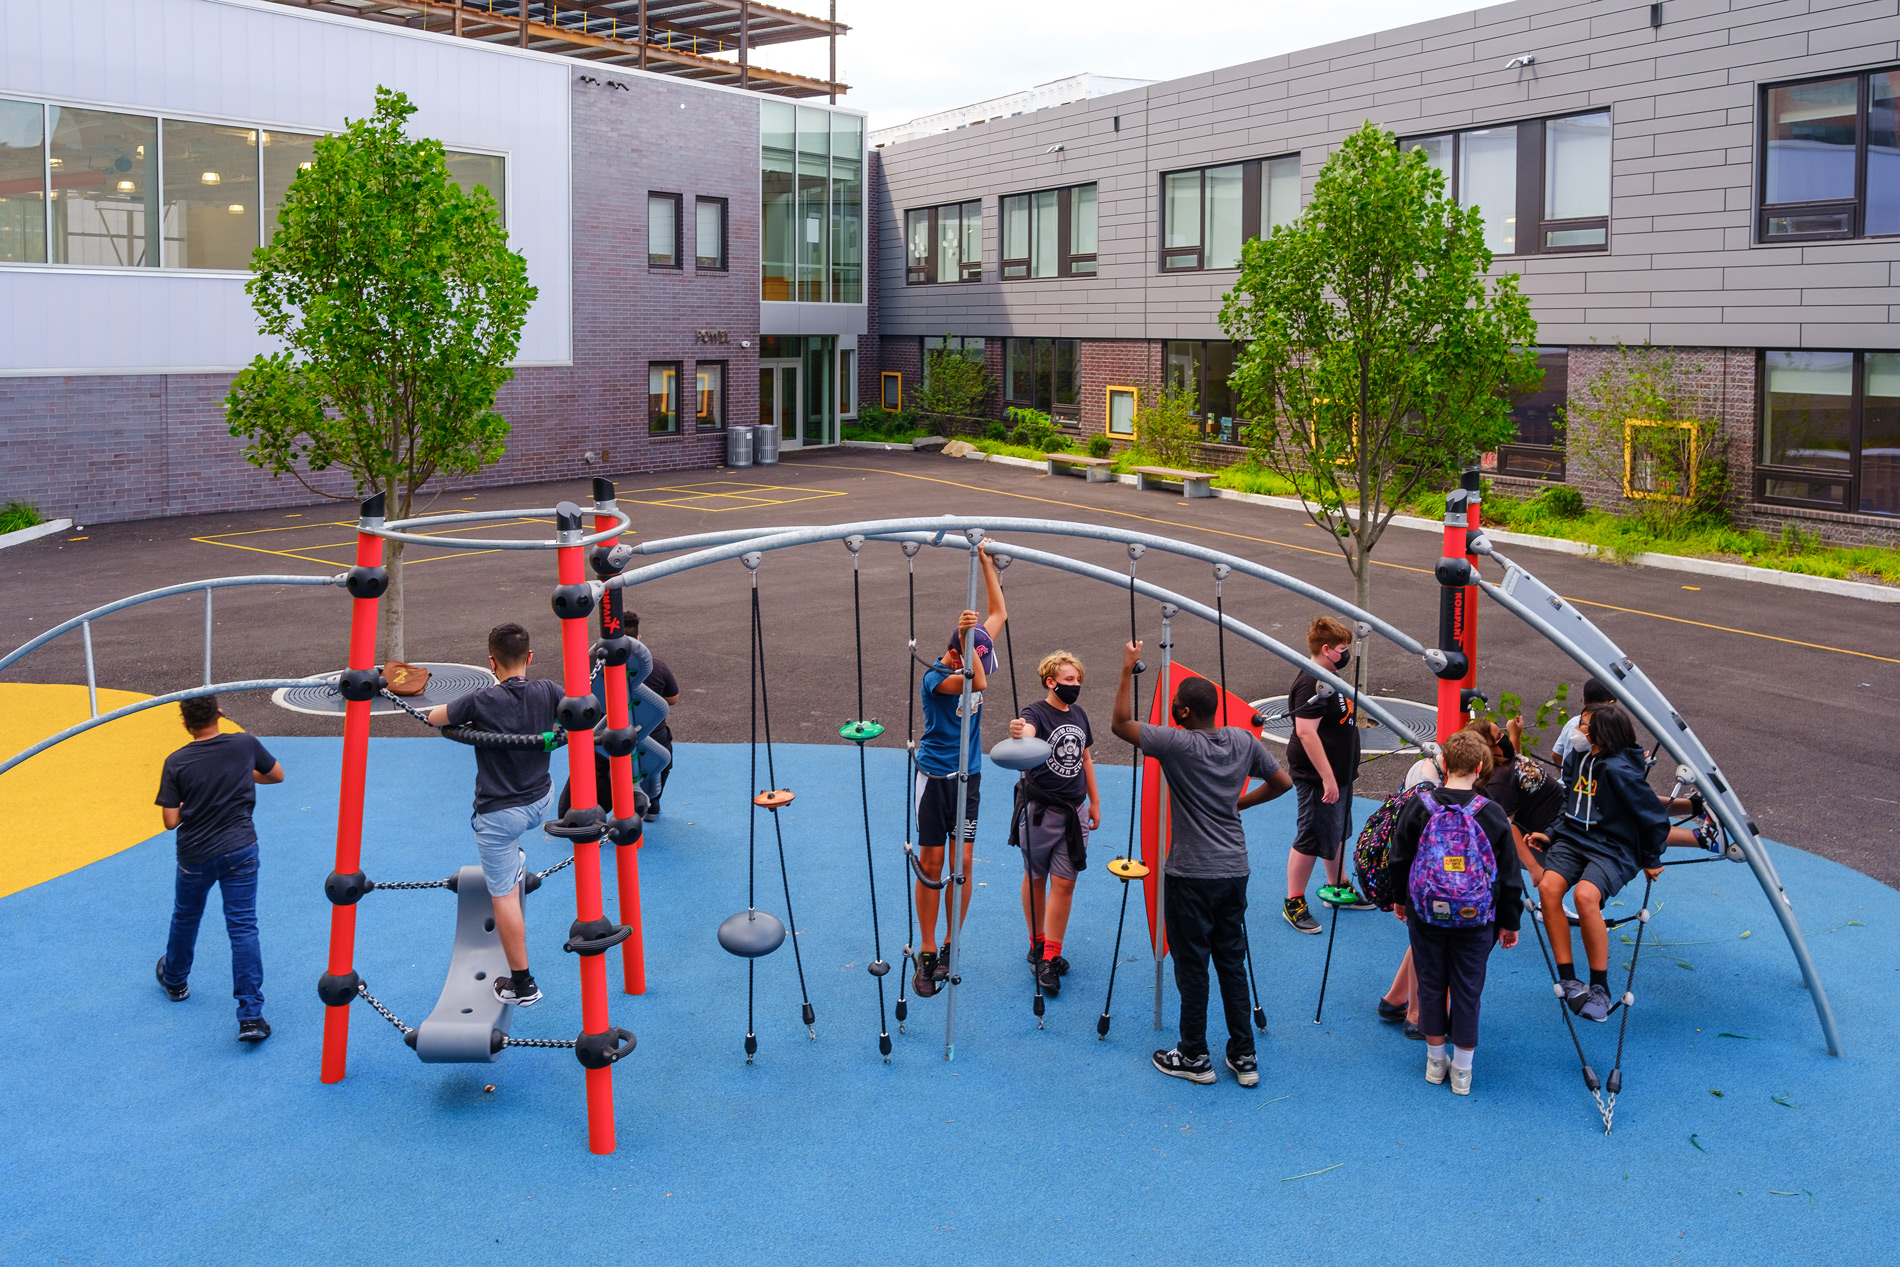 Samuel Powel Elementary School exterior with students playing.